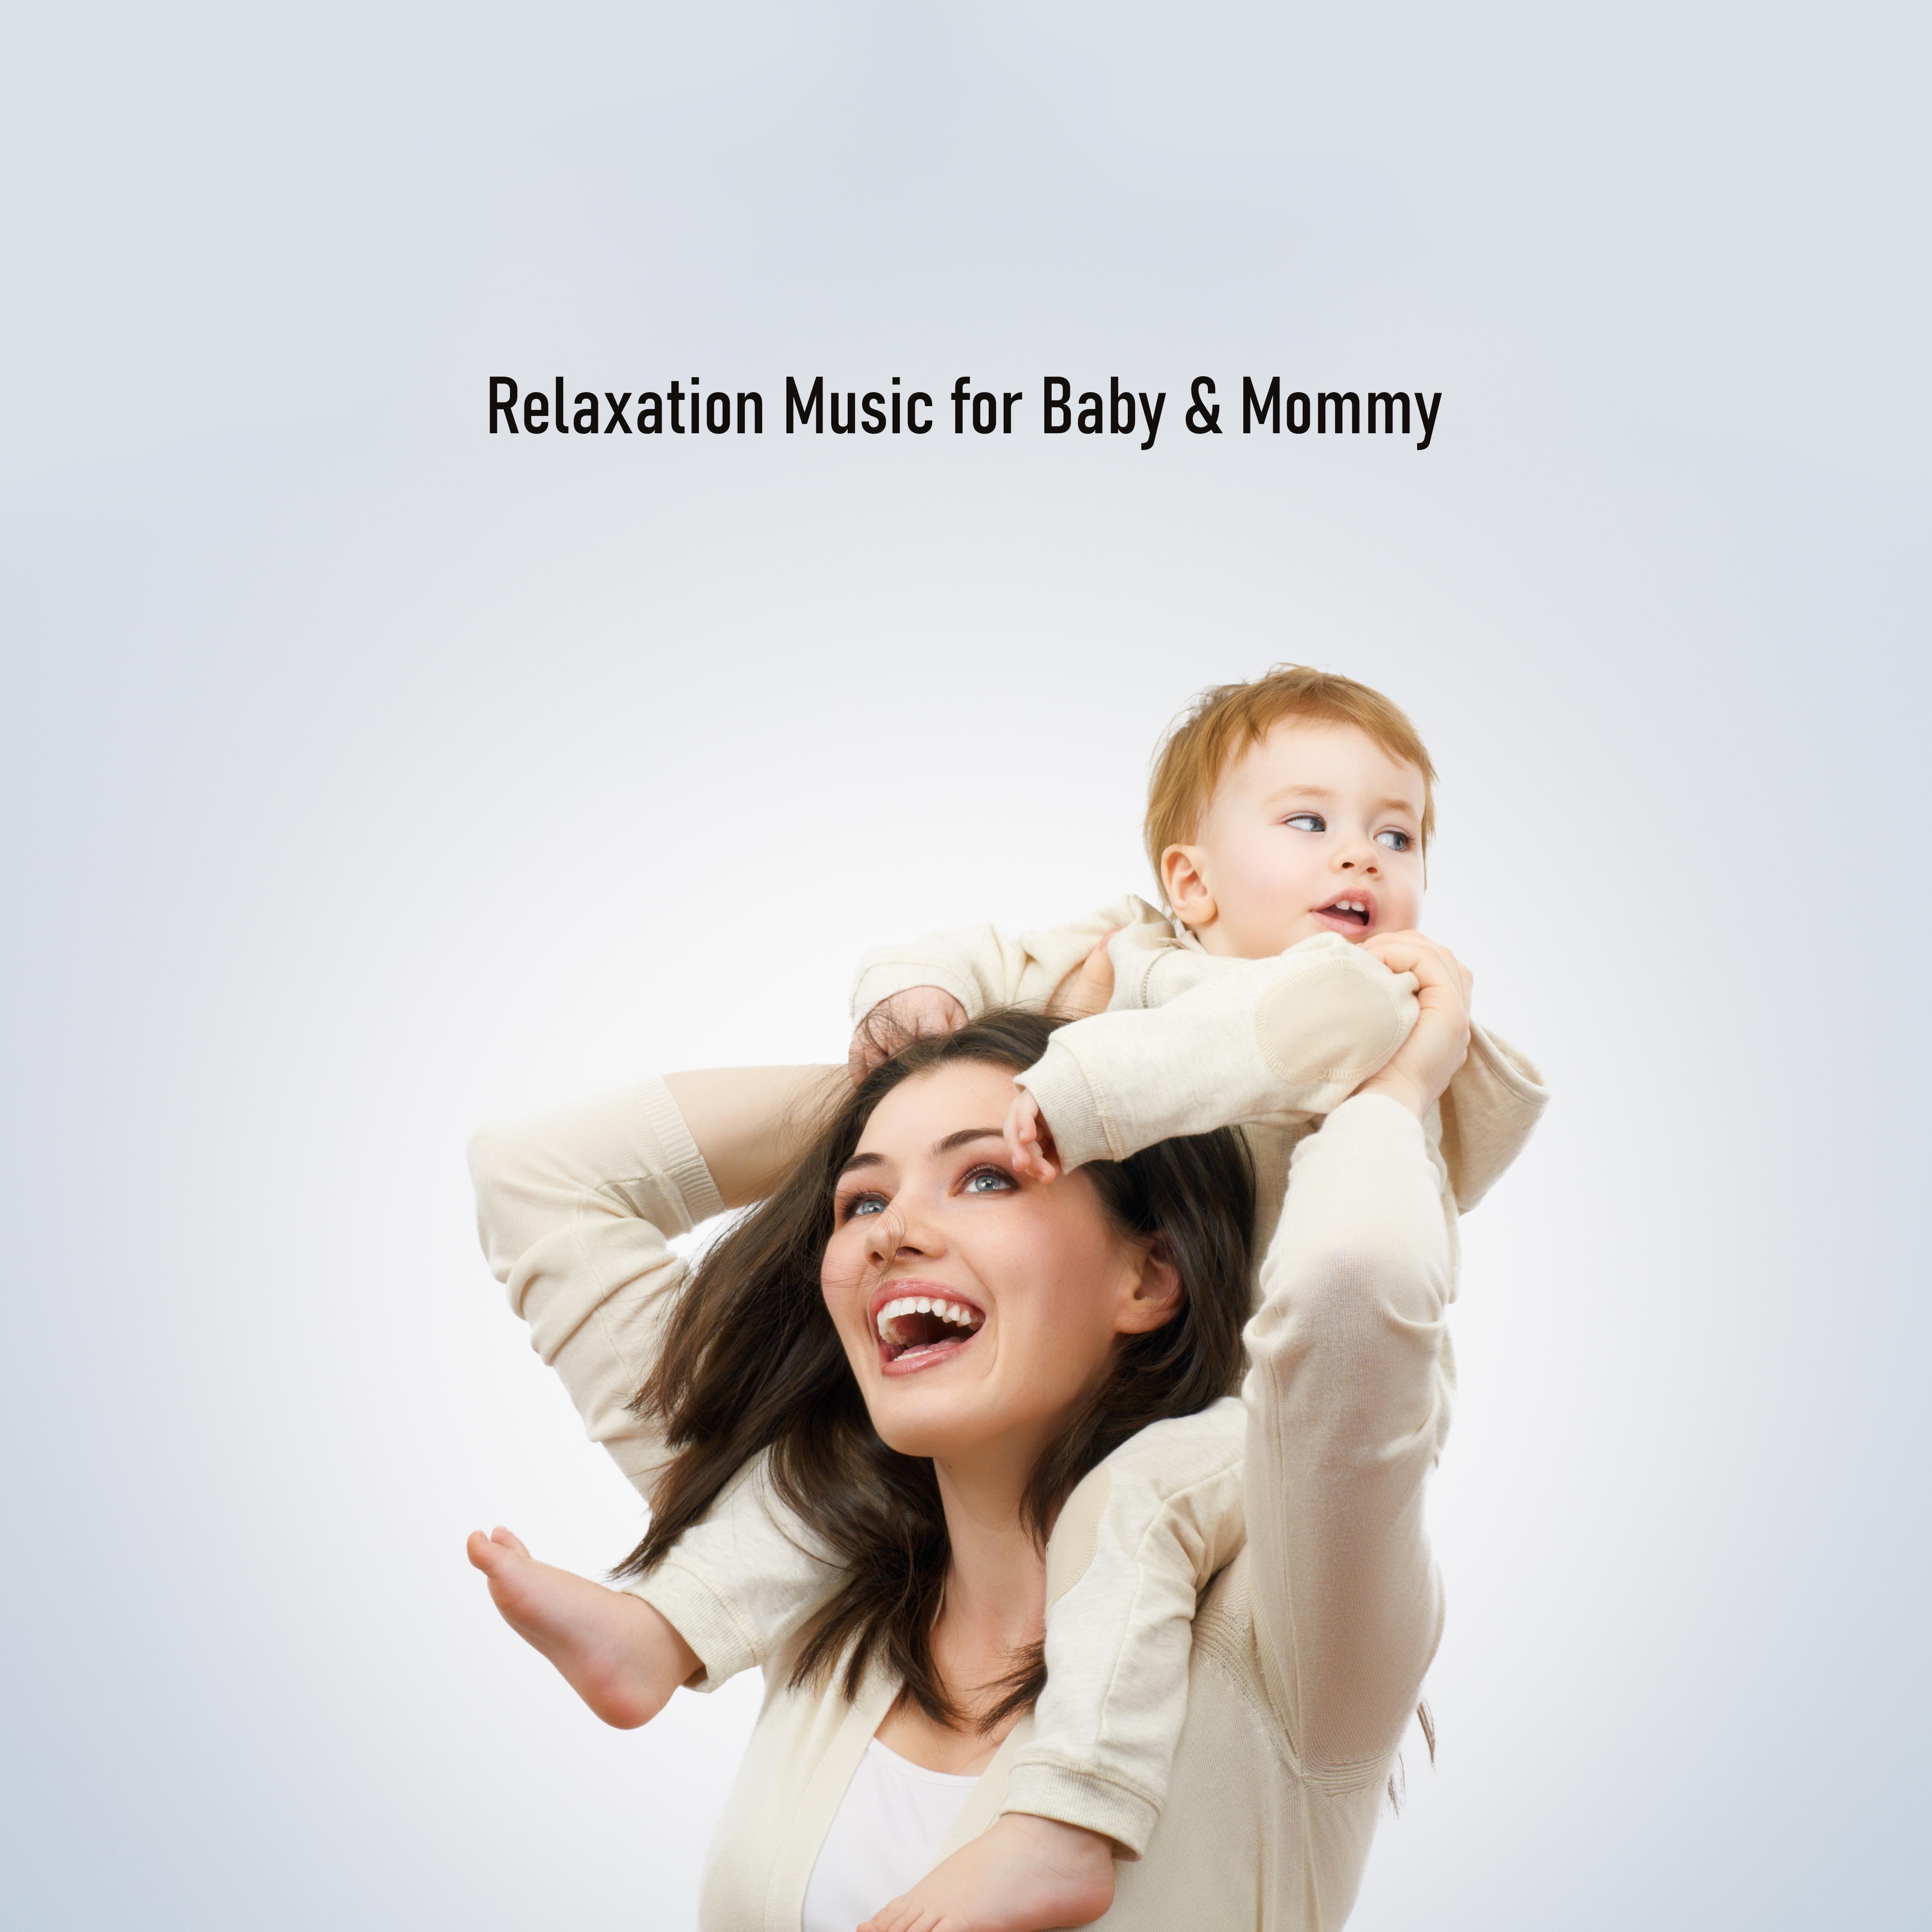 Relaxation Music for Baby & Mommy: Calming Sounds to Rest, Meditation, Calm Sleep, Ambient Chill, Relaxed Baby, Inner Harmony, Relaxing Music Therapy